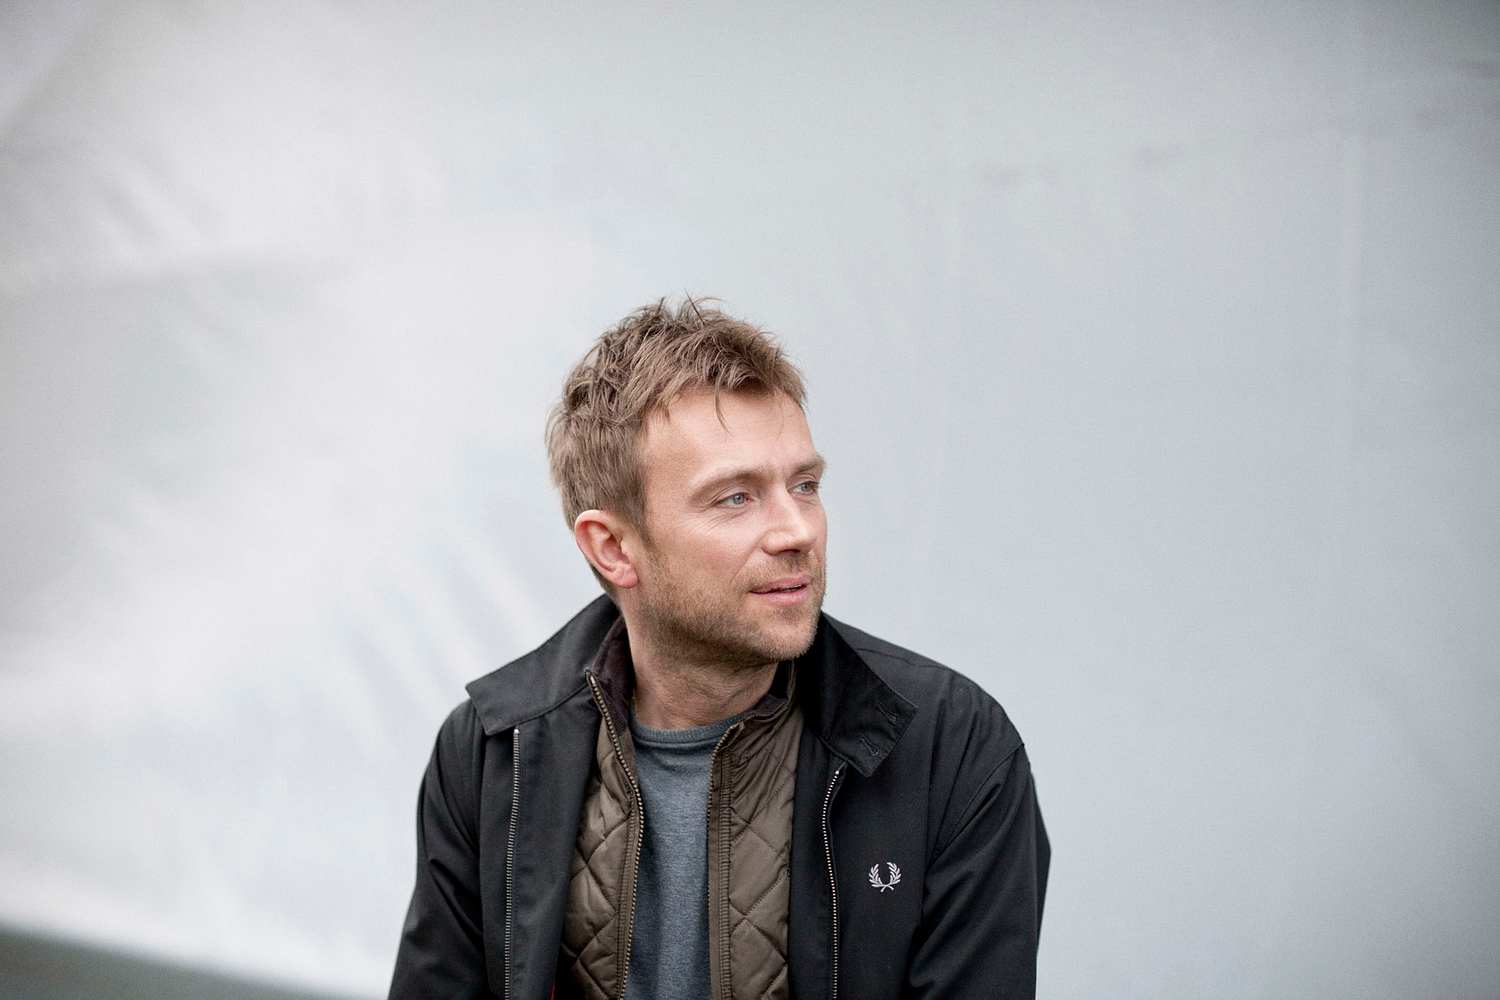 Damon Albarn responds to Adele's comments regarding his comments regarding their collaboration